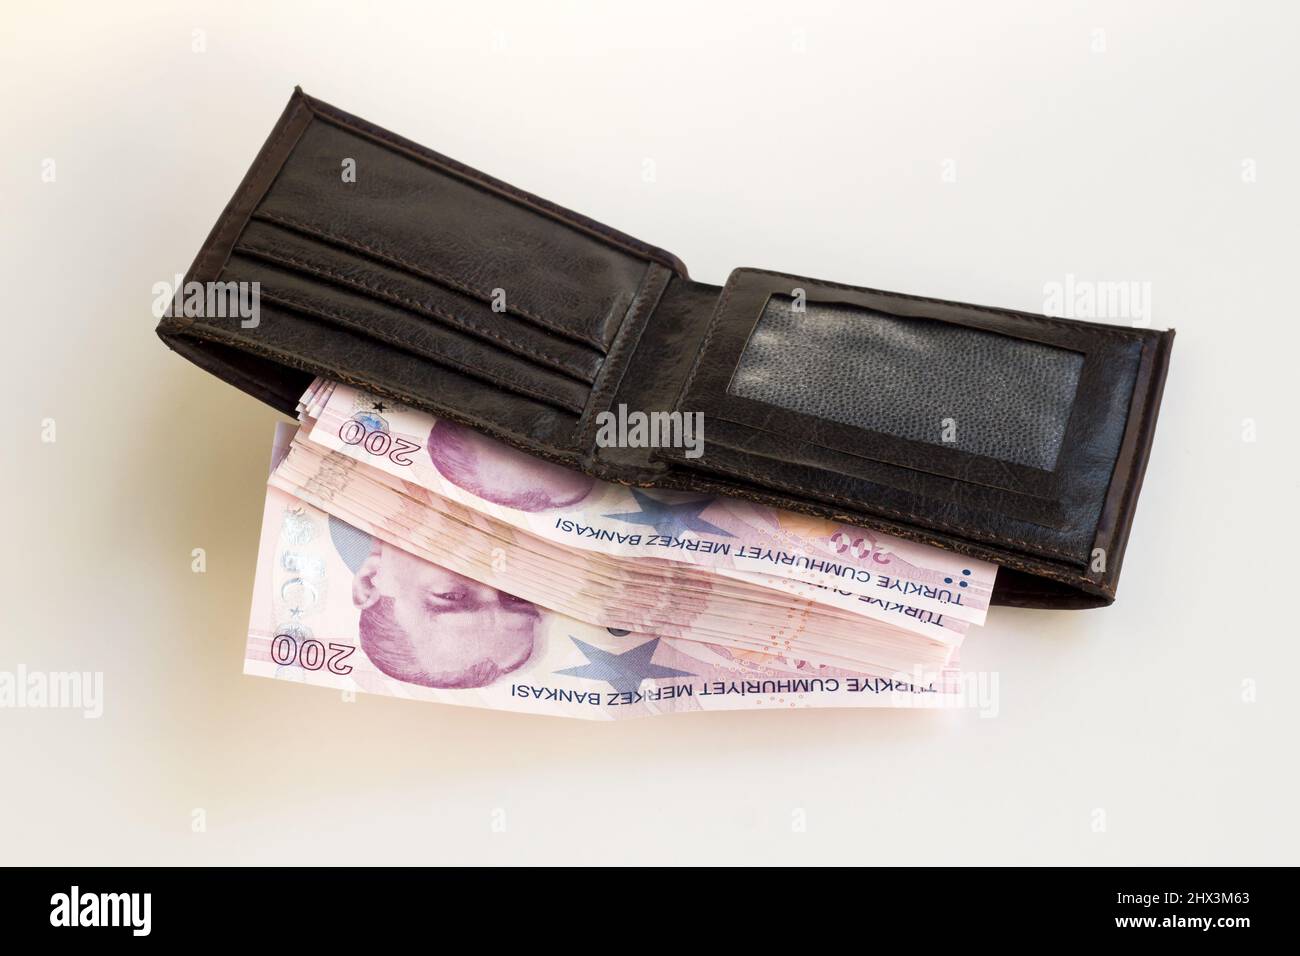 Brown leather men's wallet, fully loaded with Turkish two-hundred banknotes, on a white surface Stock Photo